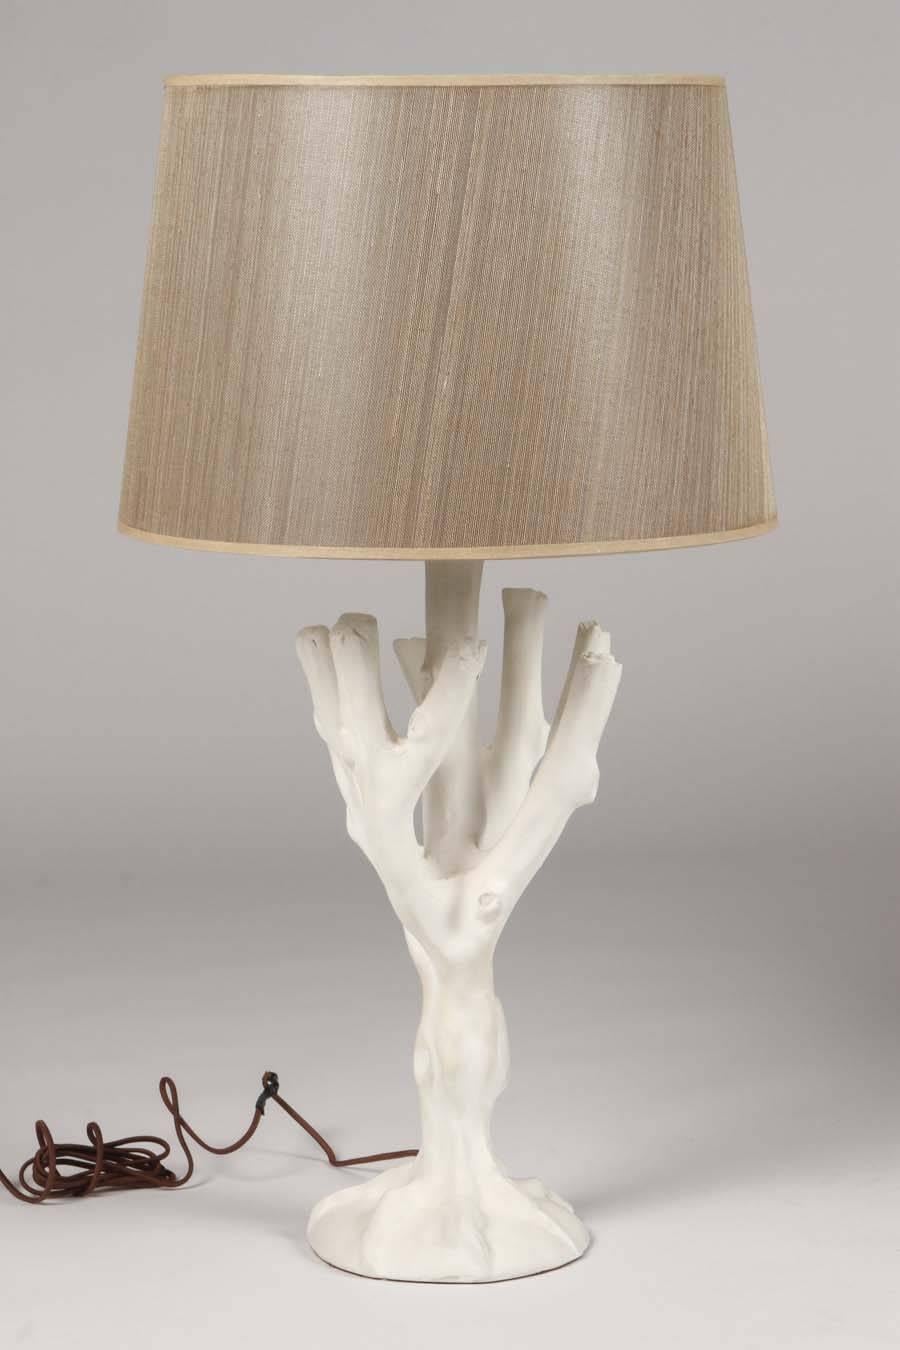 A large pair of plaster faux bois tree form lamps in the style of John Dickinson.
These Mid-Century sculptural lamps are a rare find as a pair. 

Shade: Top 15.5